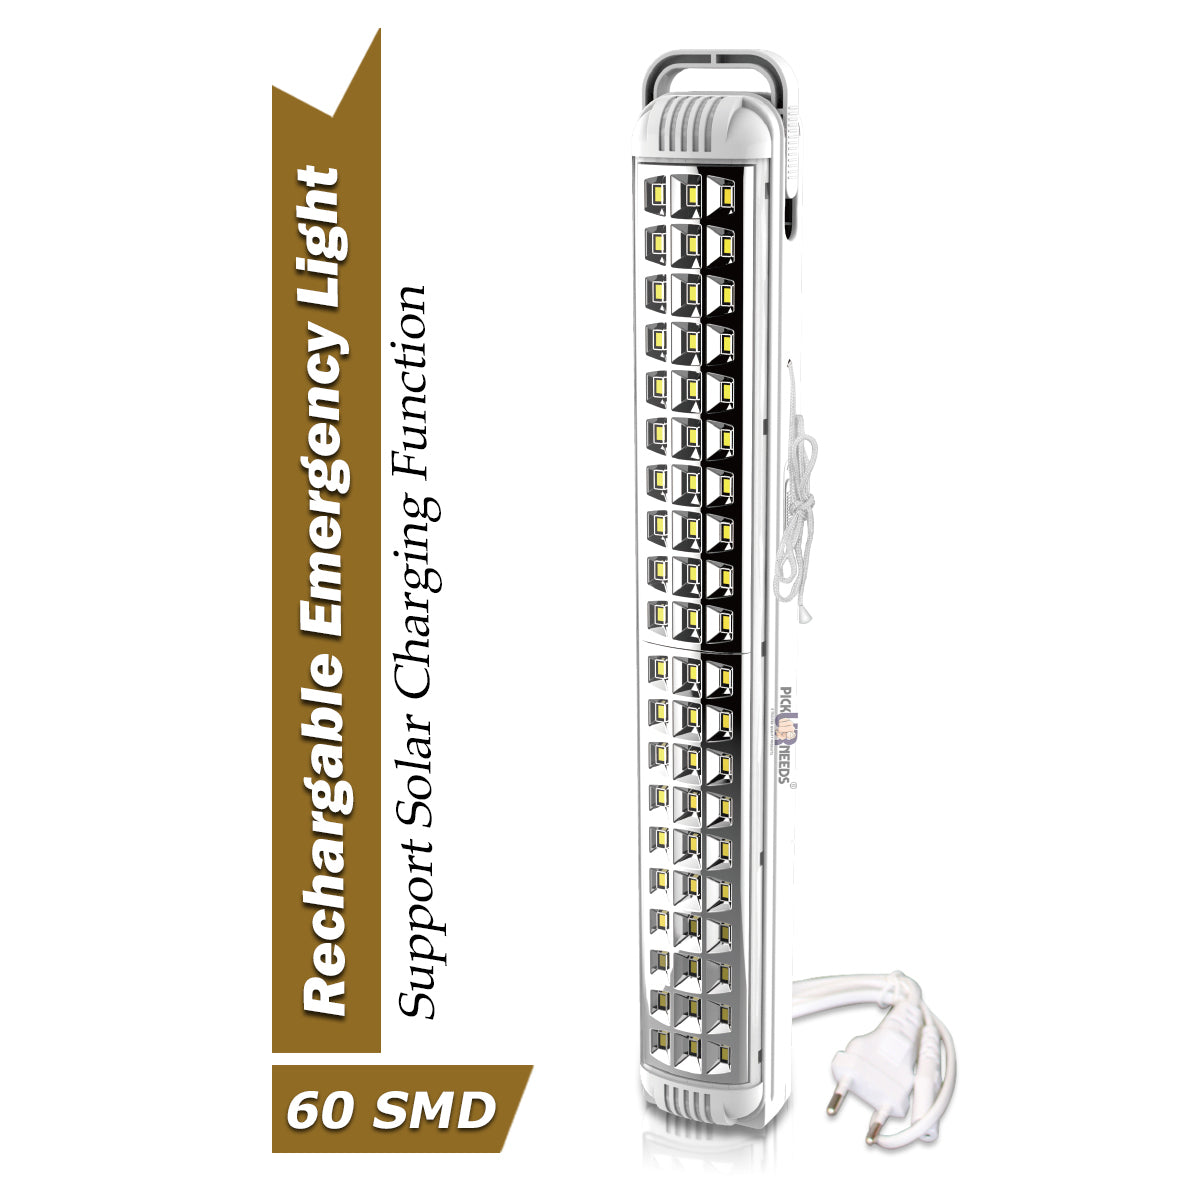 Rechargeable Long 60 SMD Light with 15 Hours Backup lantern Emergency Light